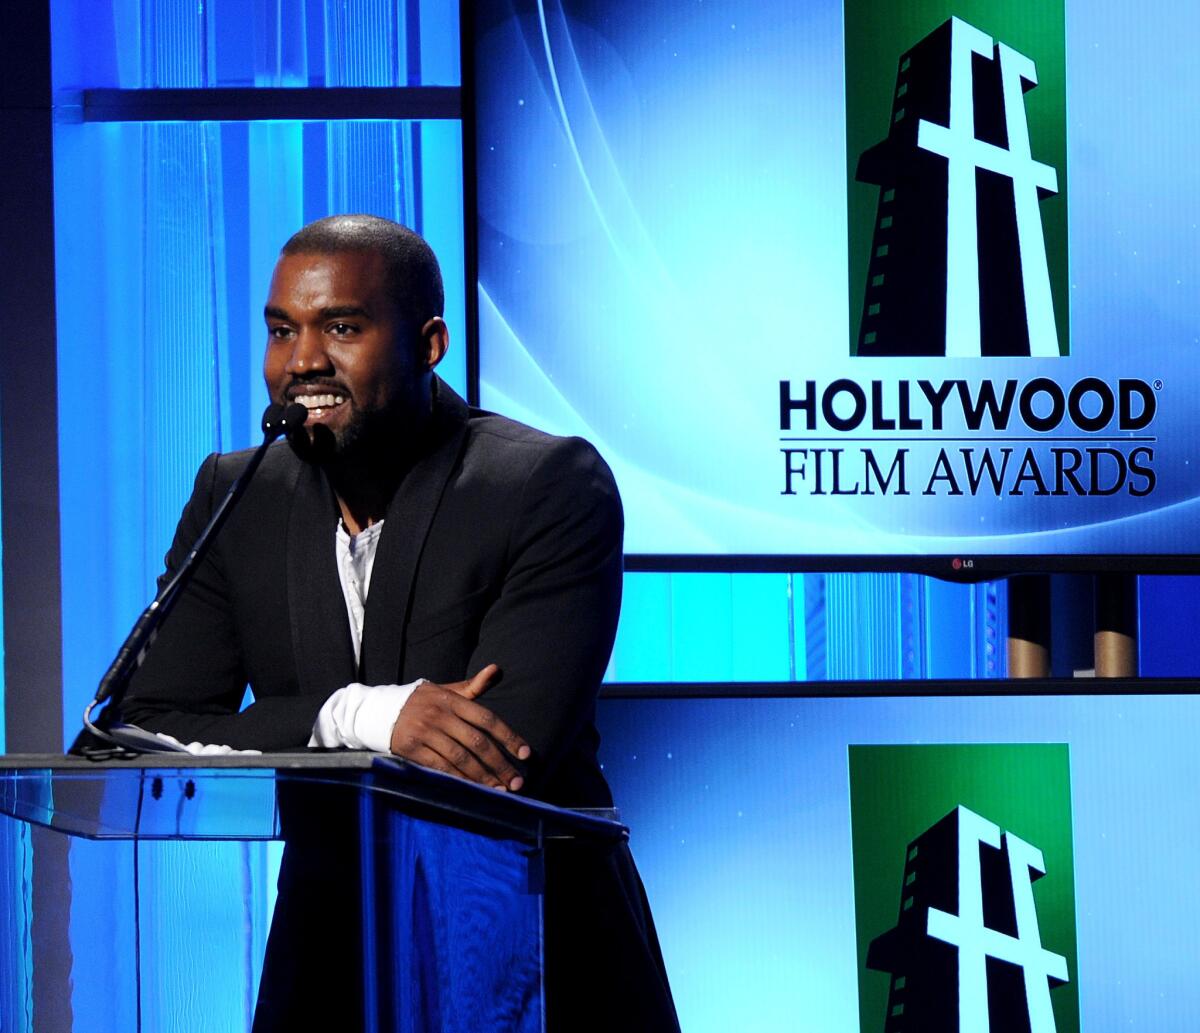 Rapper Kanye West, shown in 2013 at the Hollywood Film Awards, is working on a new album, which some have rumored will be a spoken-word project.